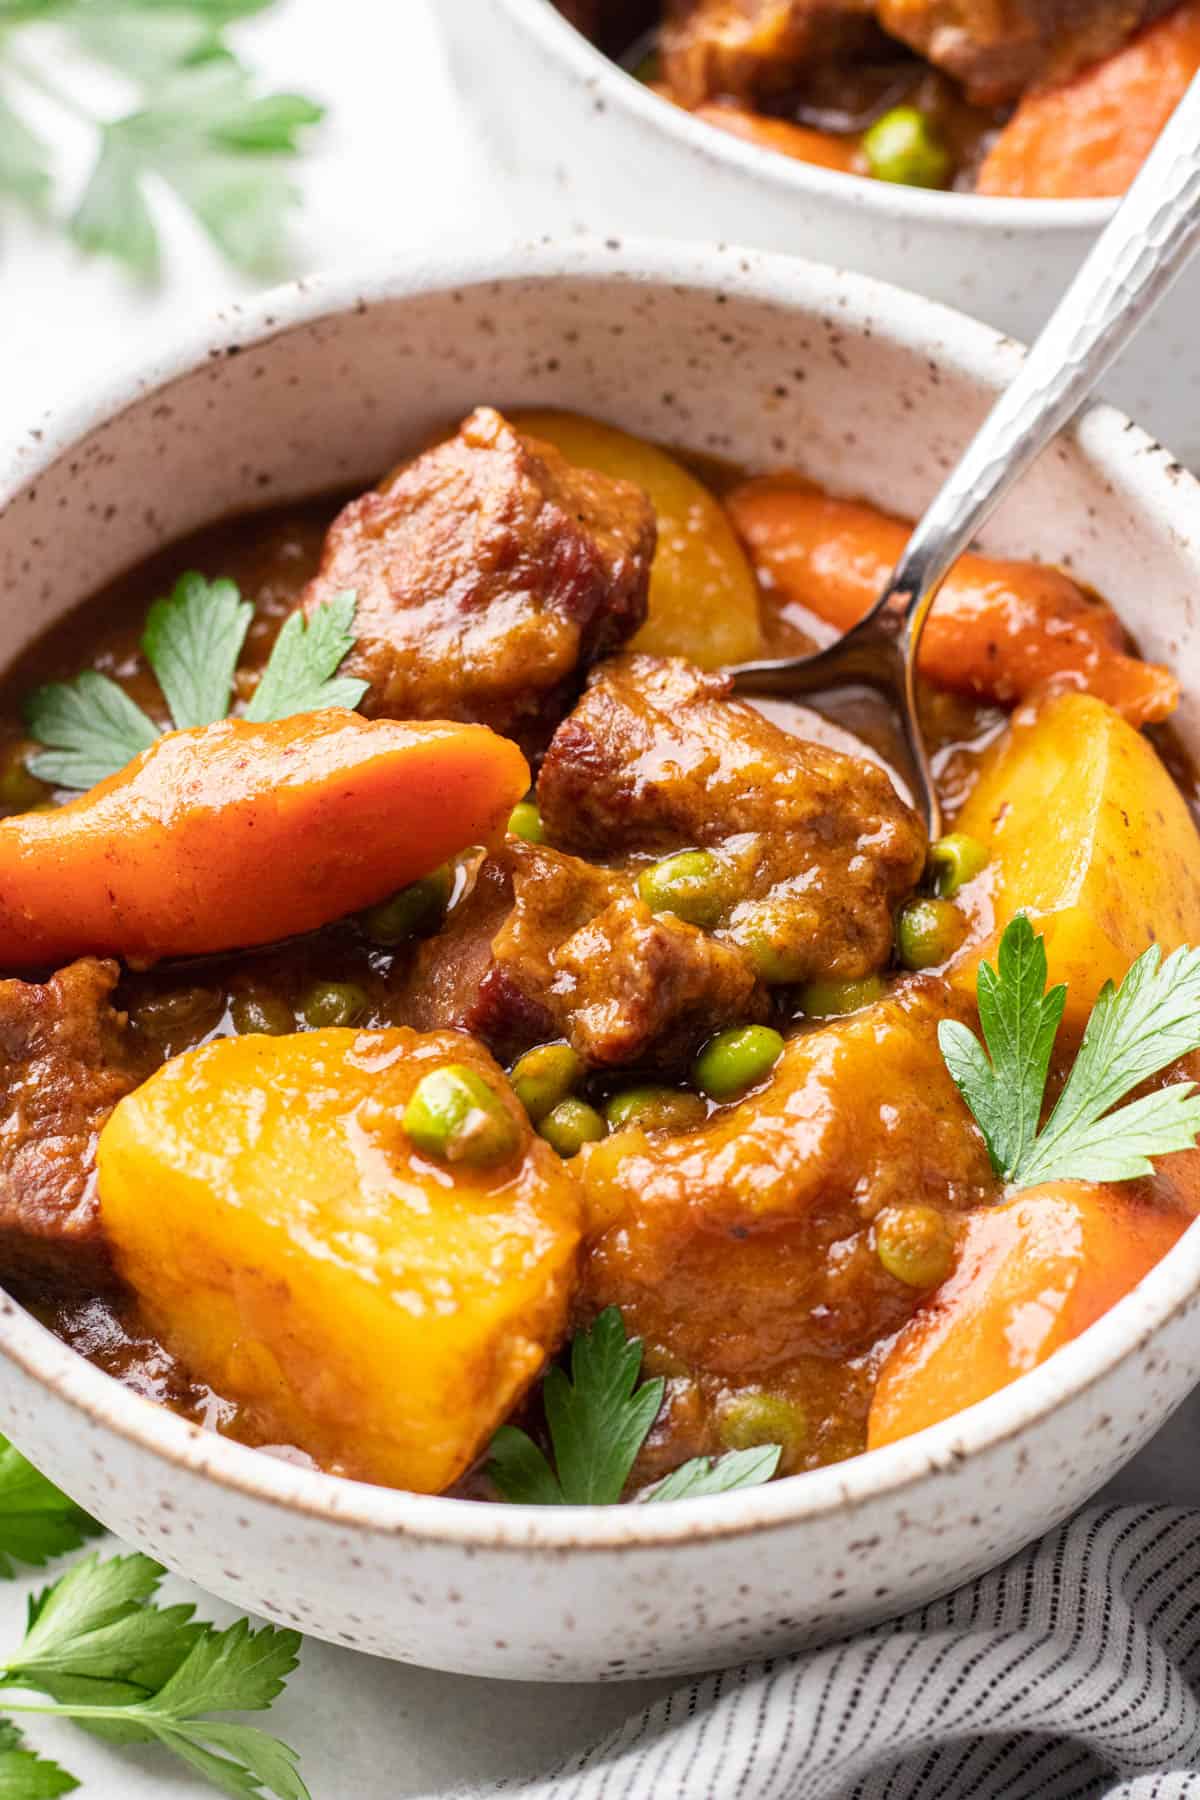 Stew with beef tips, potatoes, carrots, and peas in a bowl.